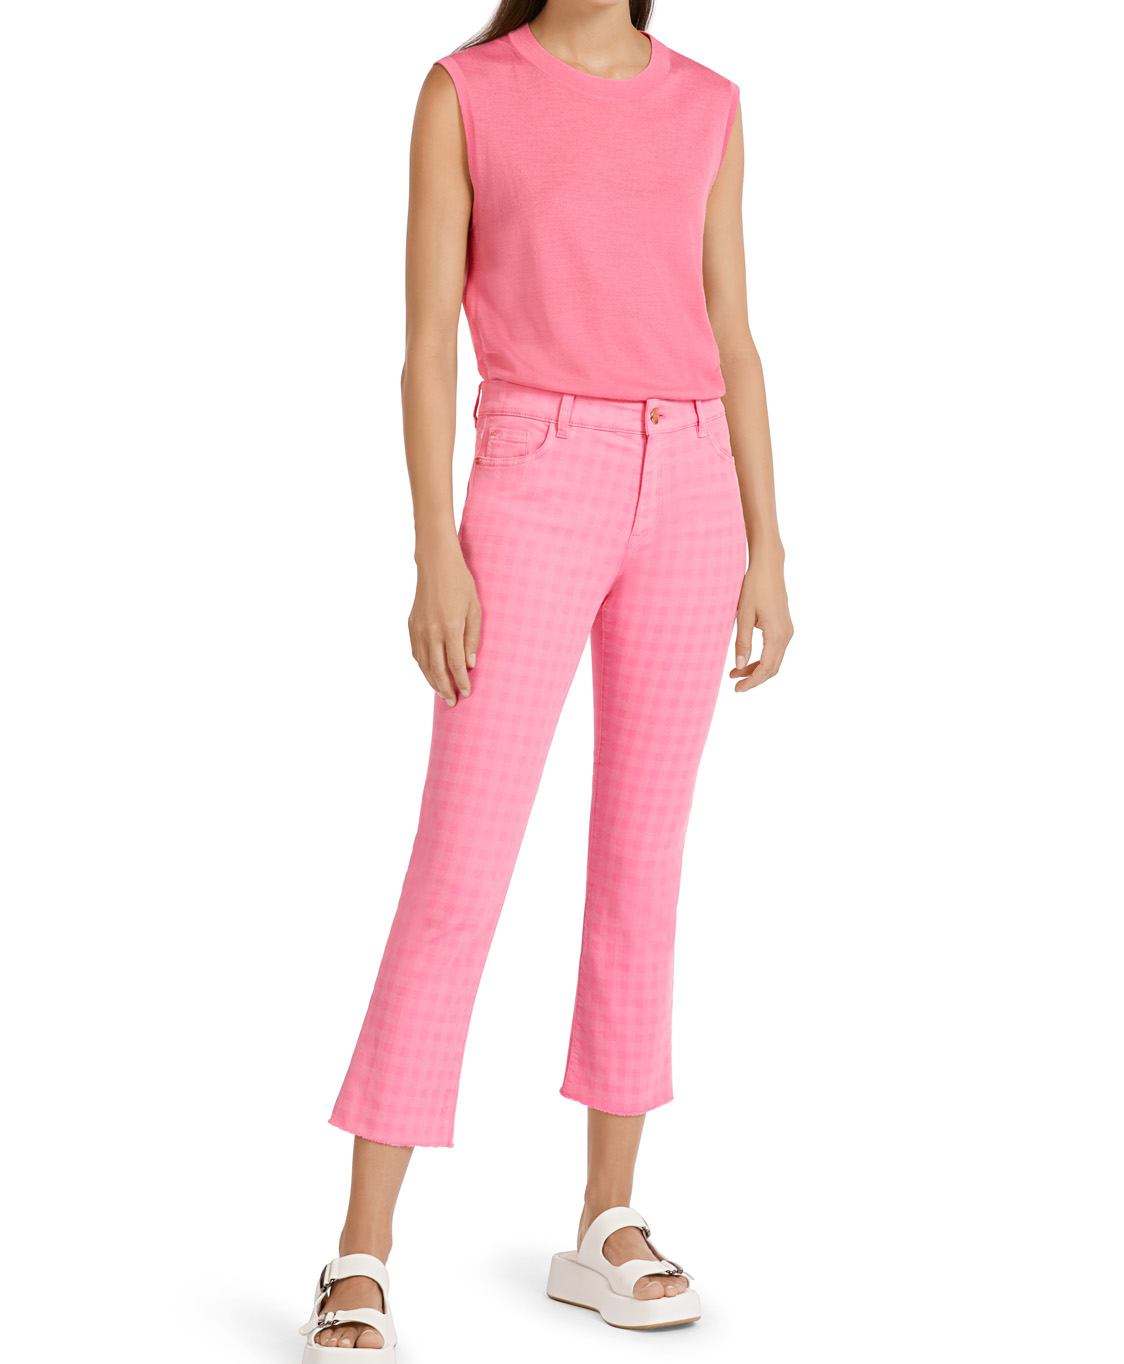 Marccain Collectie Jeans Uc 82.05 D68 Pink